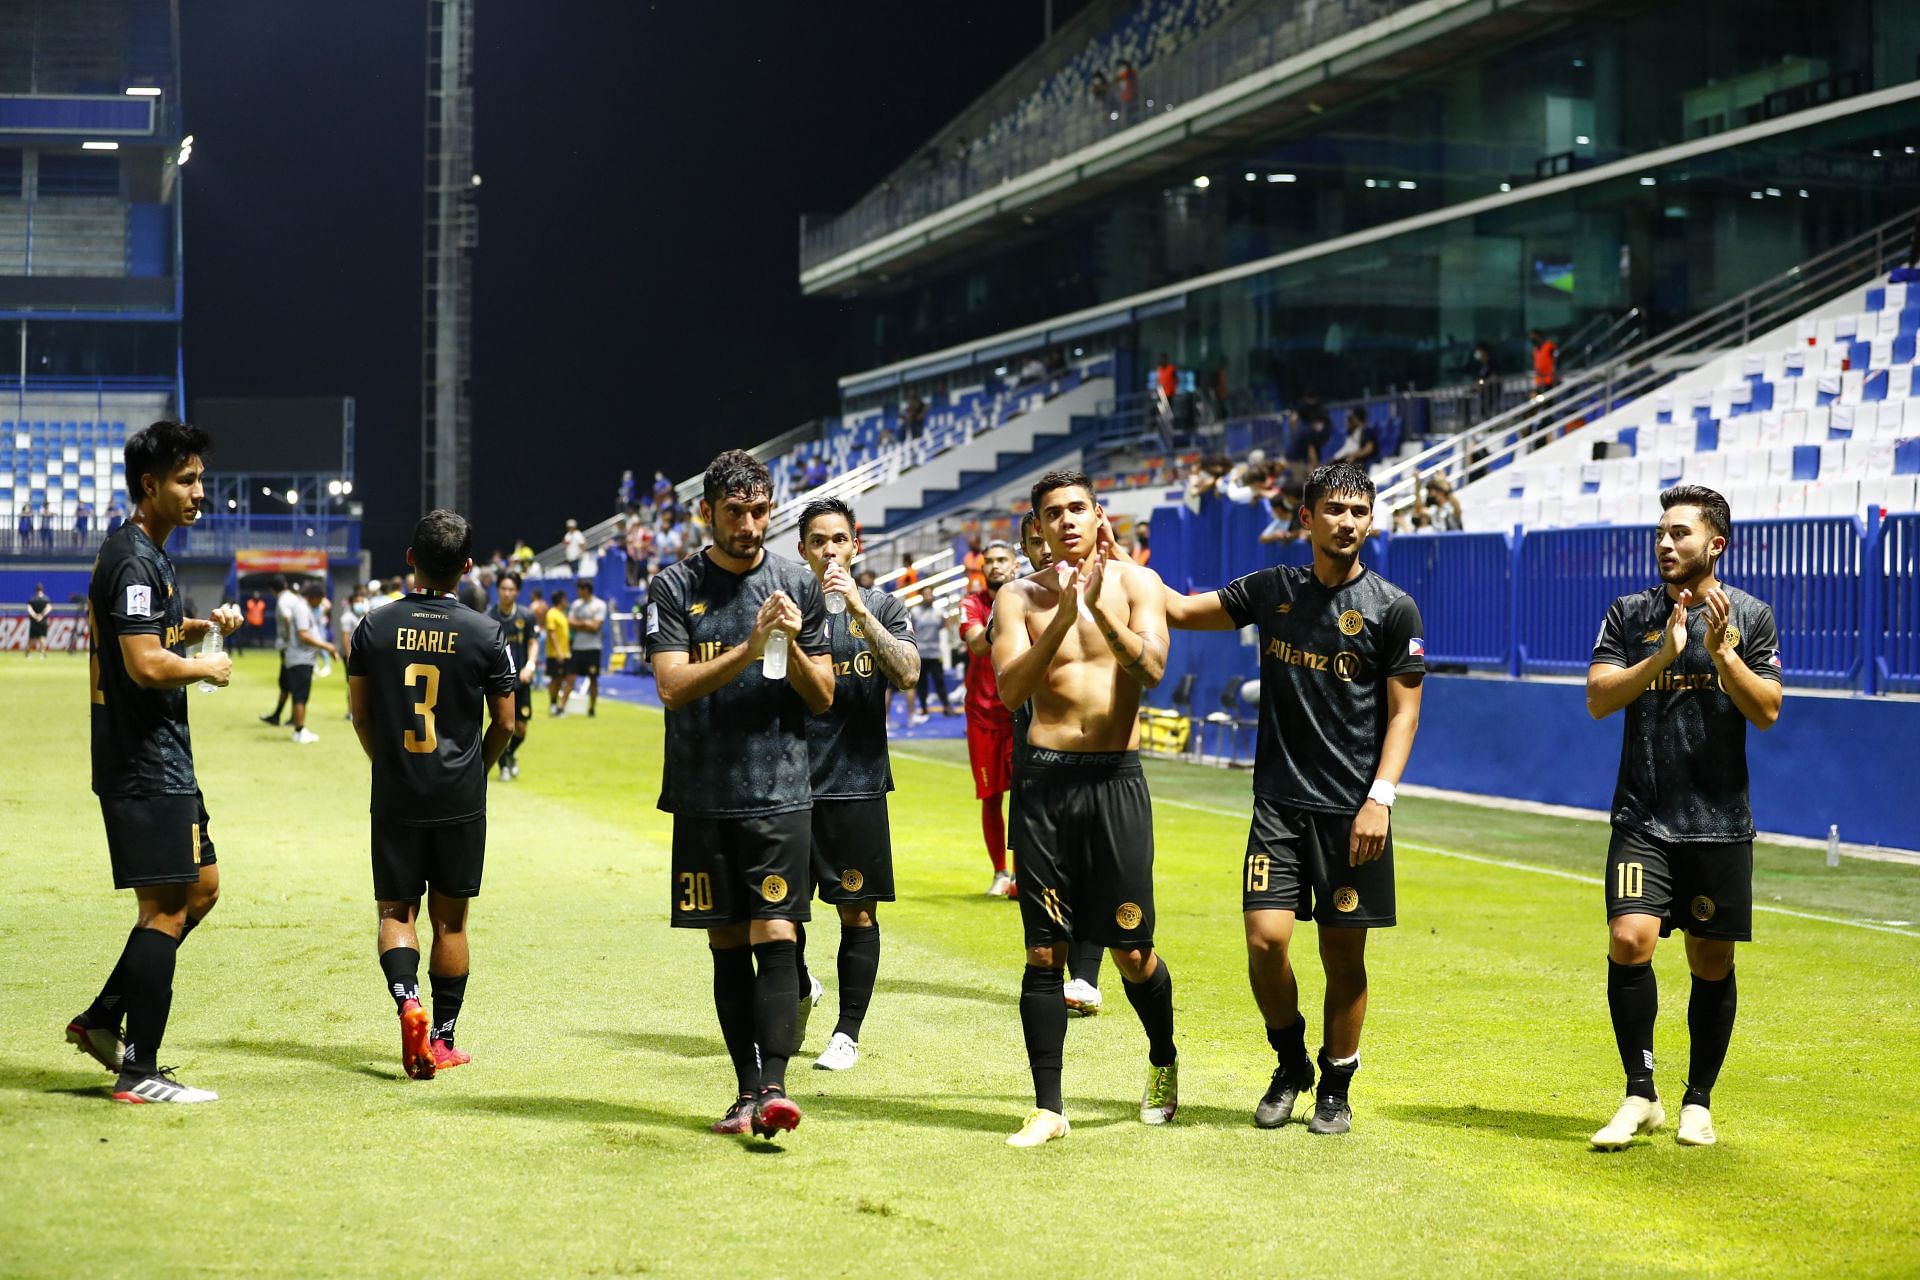 Pathum United are expected to win the game in Bangkok.